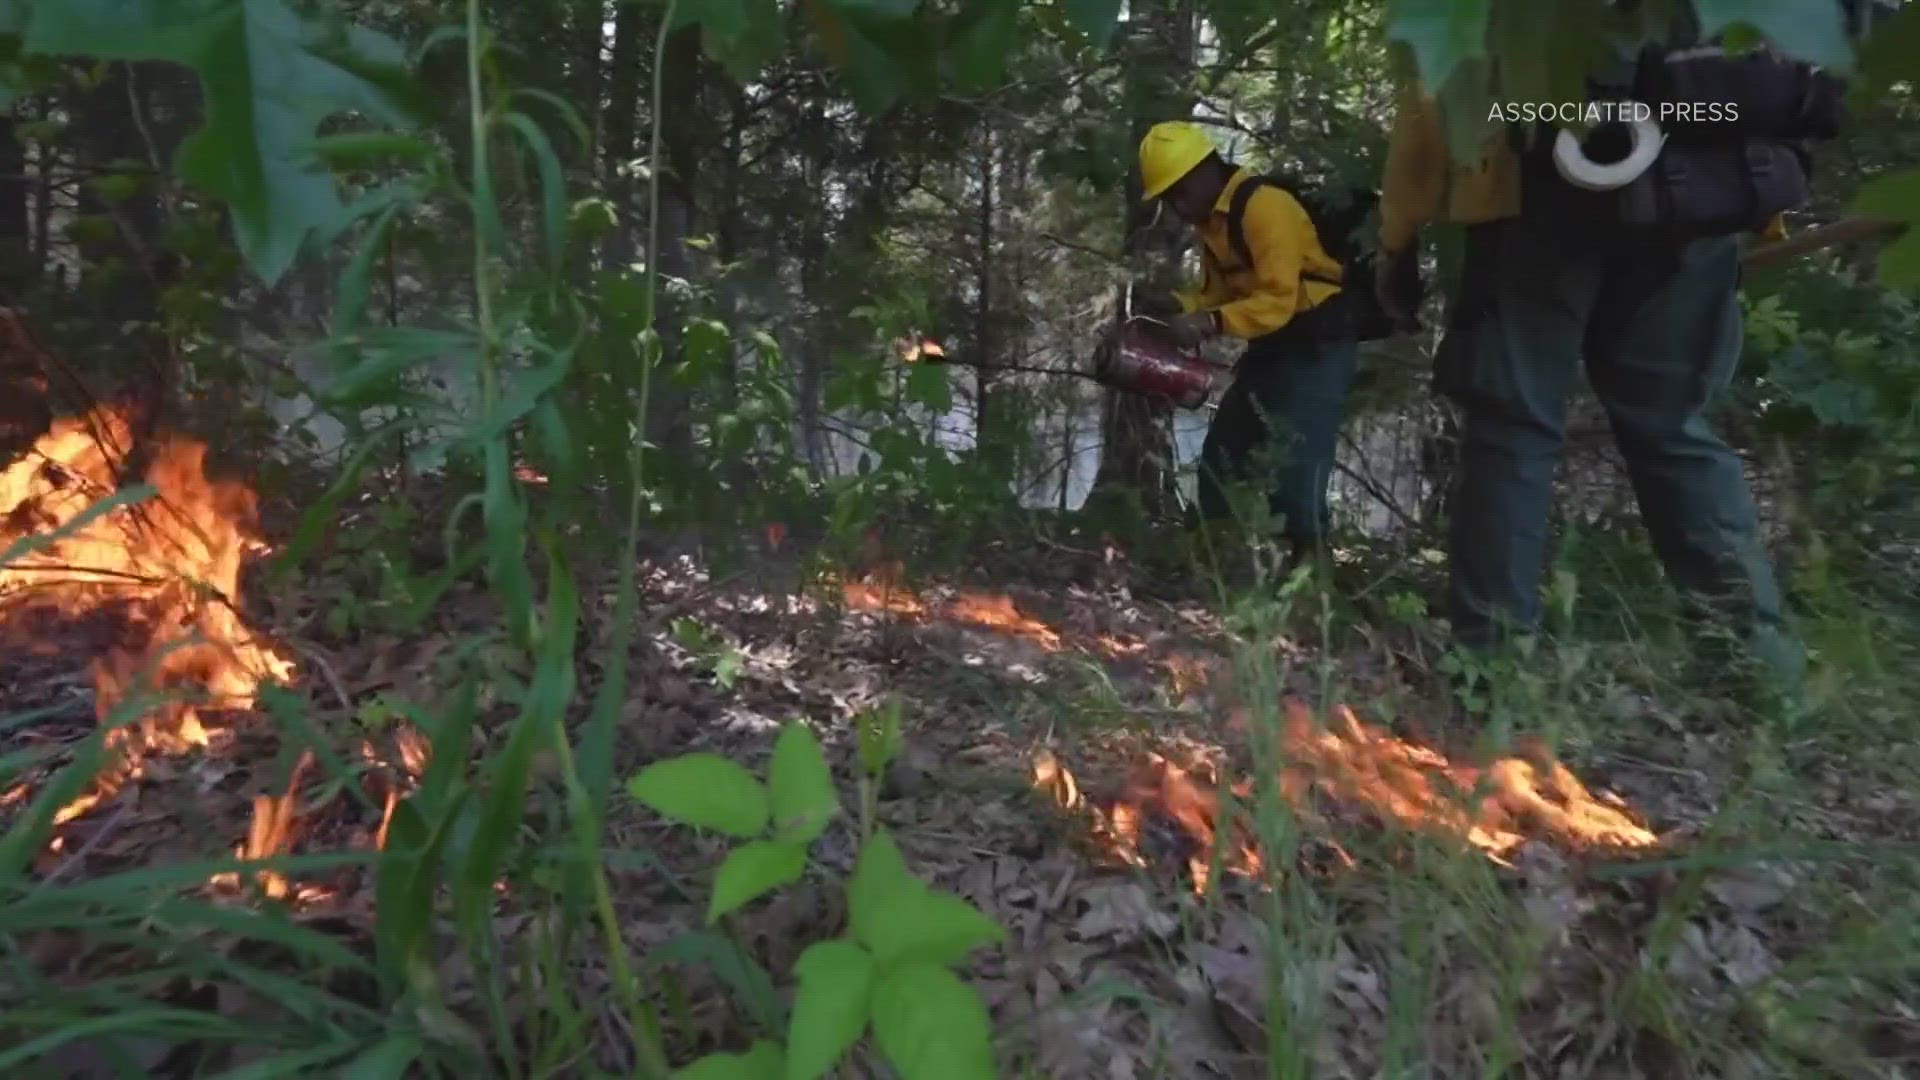 Of the U.S. Forest Service's 13,000 workers, fewer than 1.5% are Black. A new partnership with HBCUs aims to improve representation in firefighting.